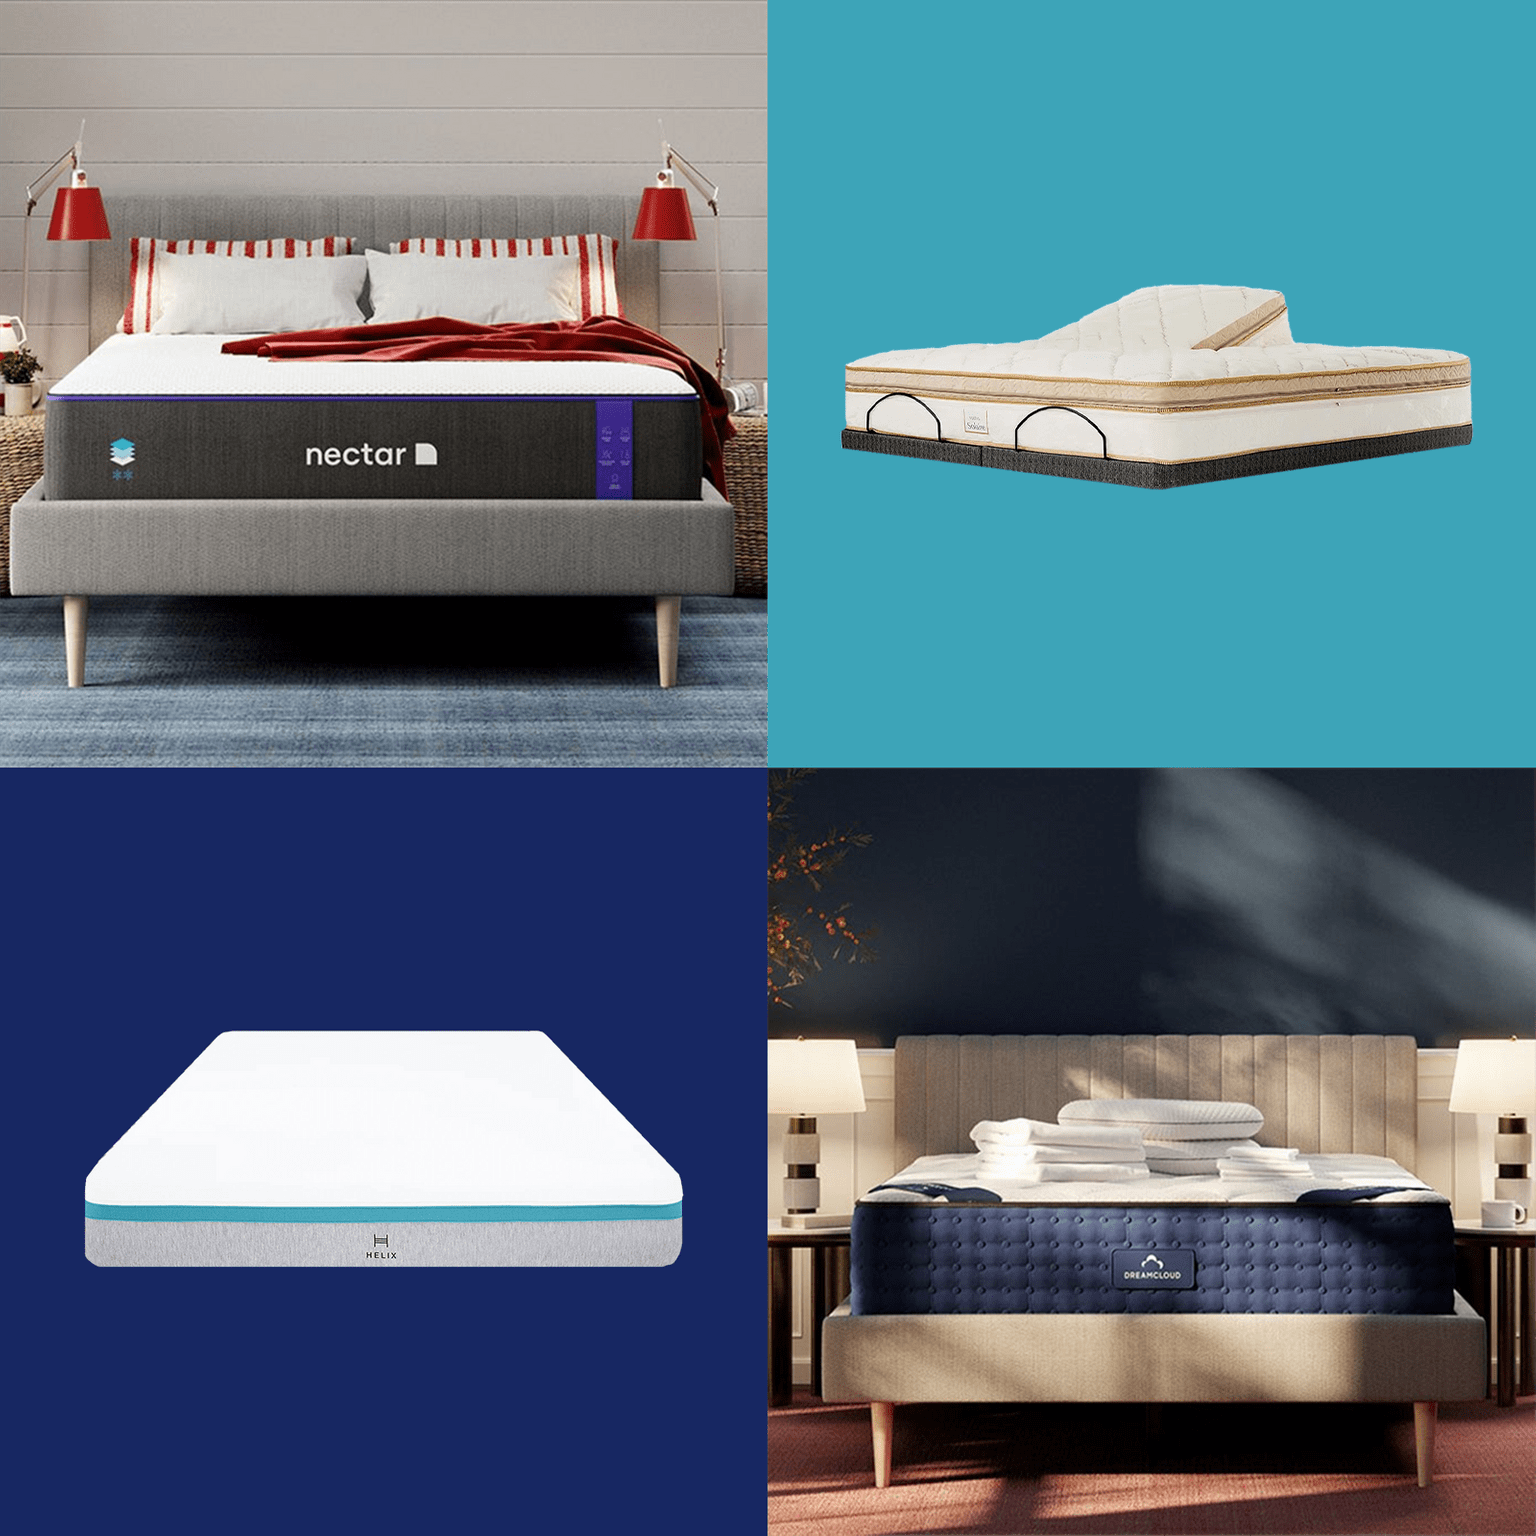 The 5 Best Mattresses for Side Sleepers in Plush, Firm and Memory Foam